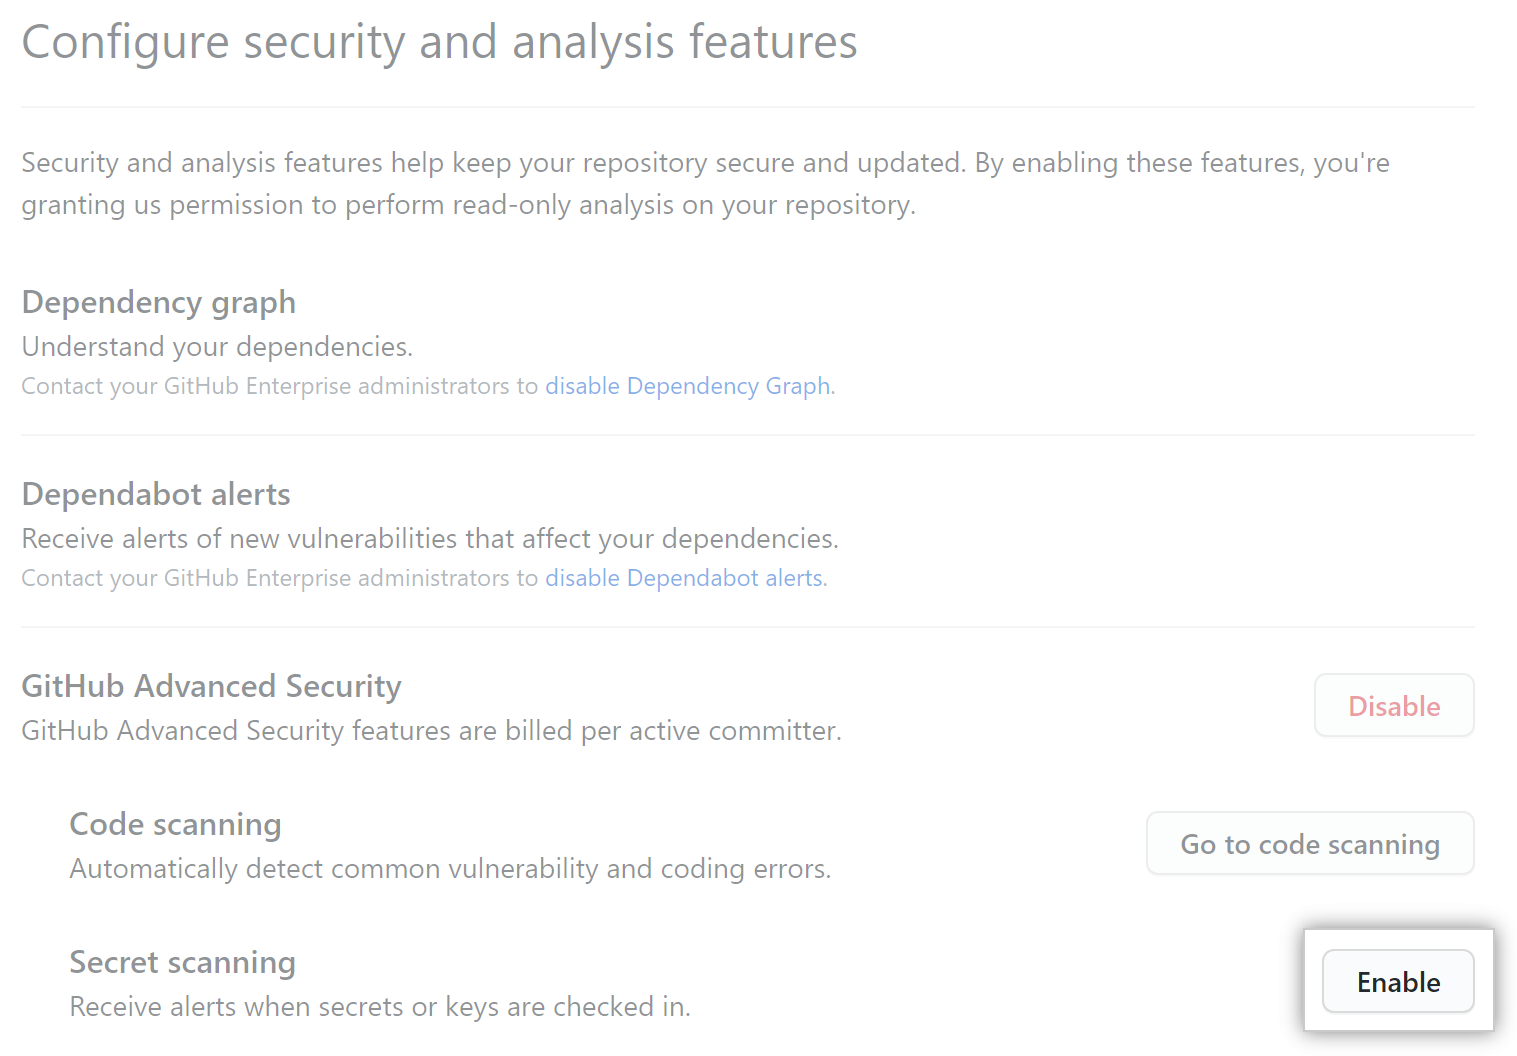 Screenshot of "Enable" or "Disable" button for "Configure security and analysis" features